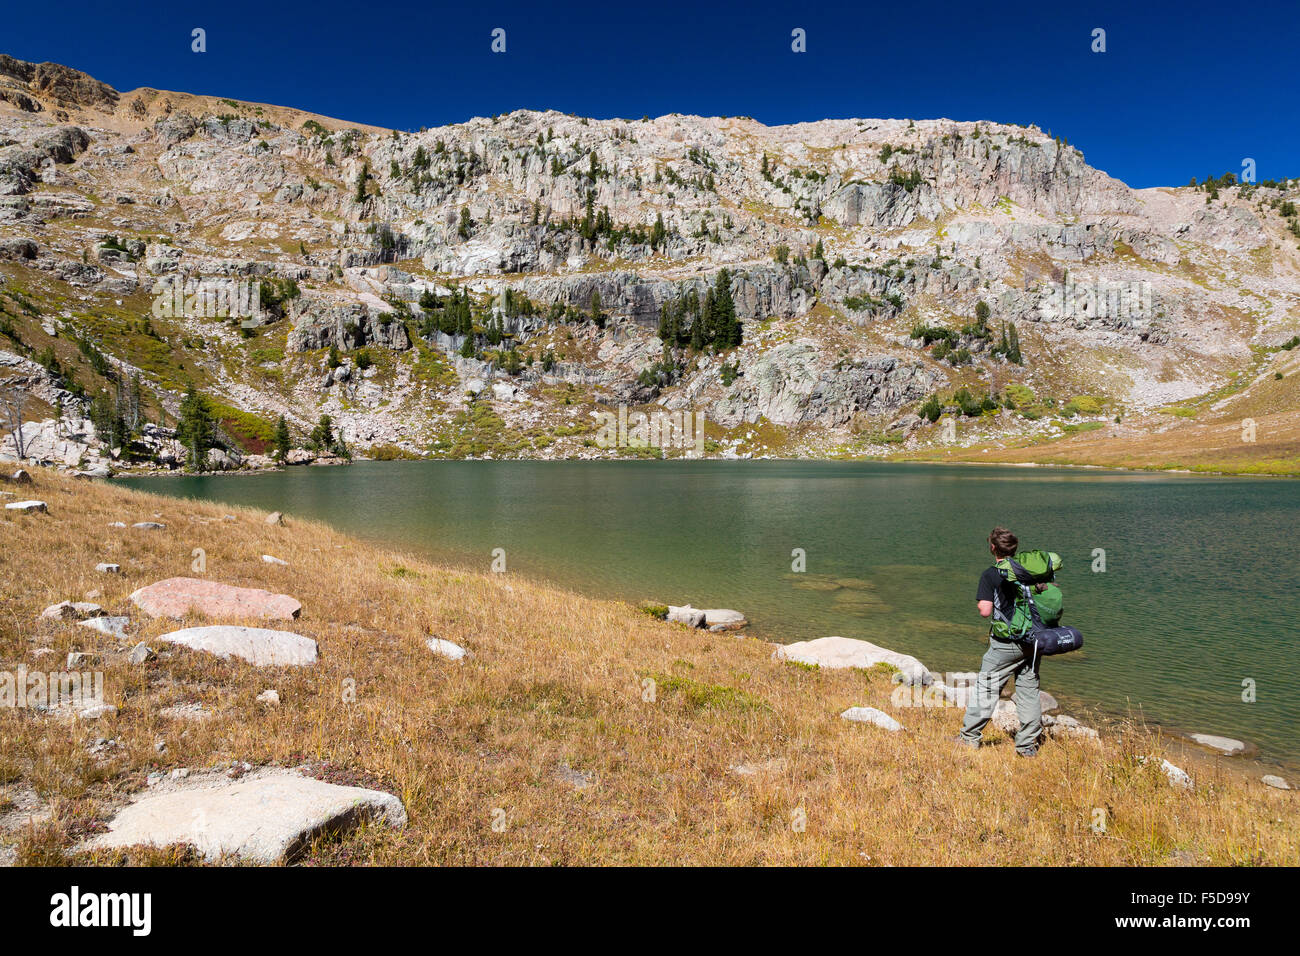 An adult male backpacker stopping at Shoal Lake to admire the views, Gros Ventre Wilderness, Wyoming Stock Photo